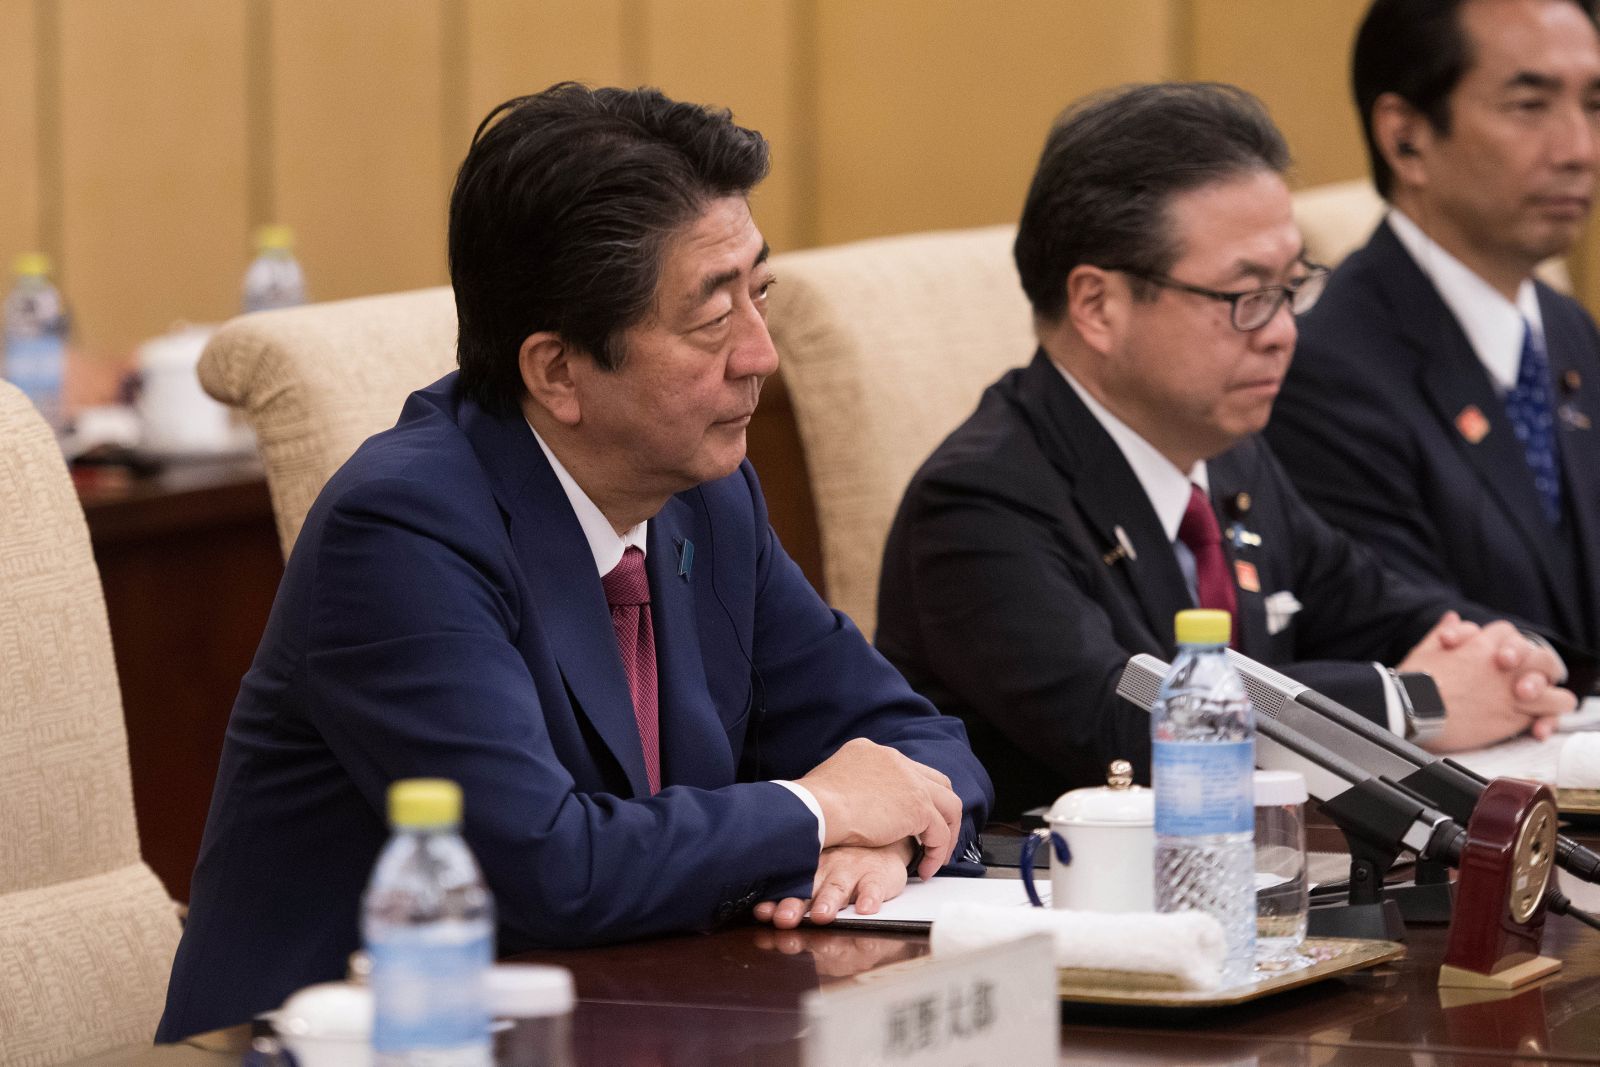 Shinzo Abe in China: Risky Move or Well-Thought-Out Strategy?